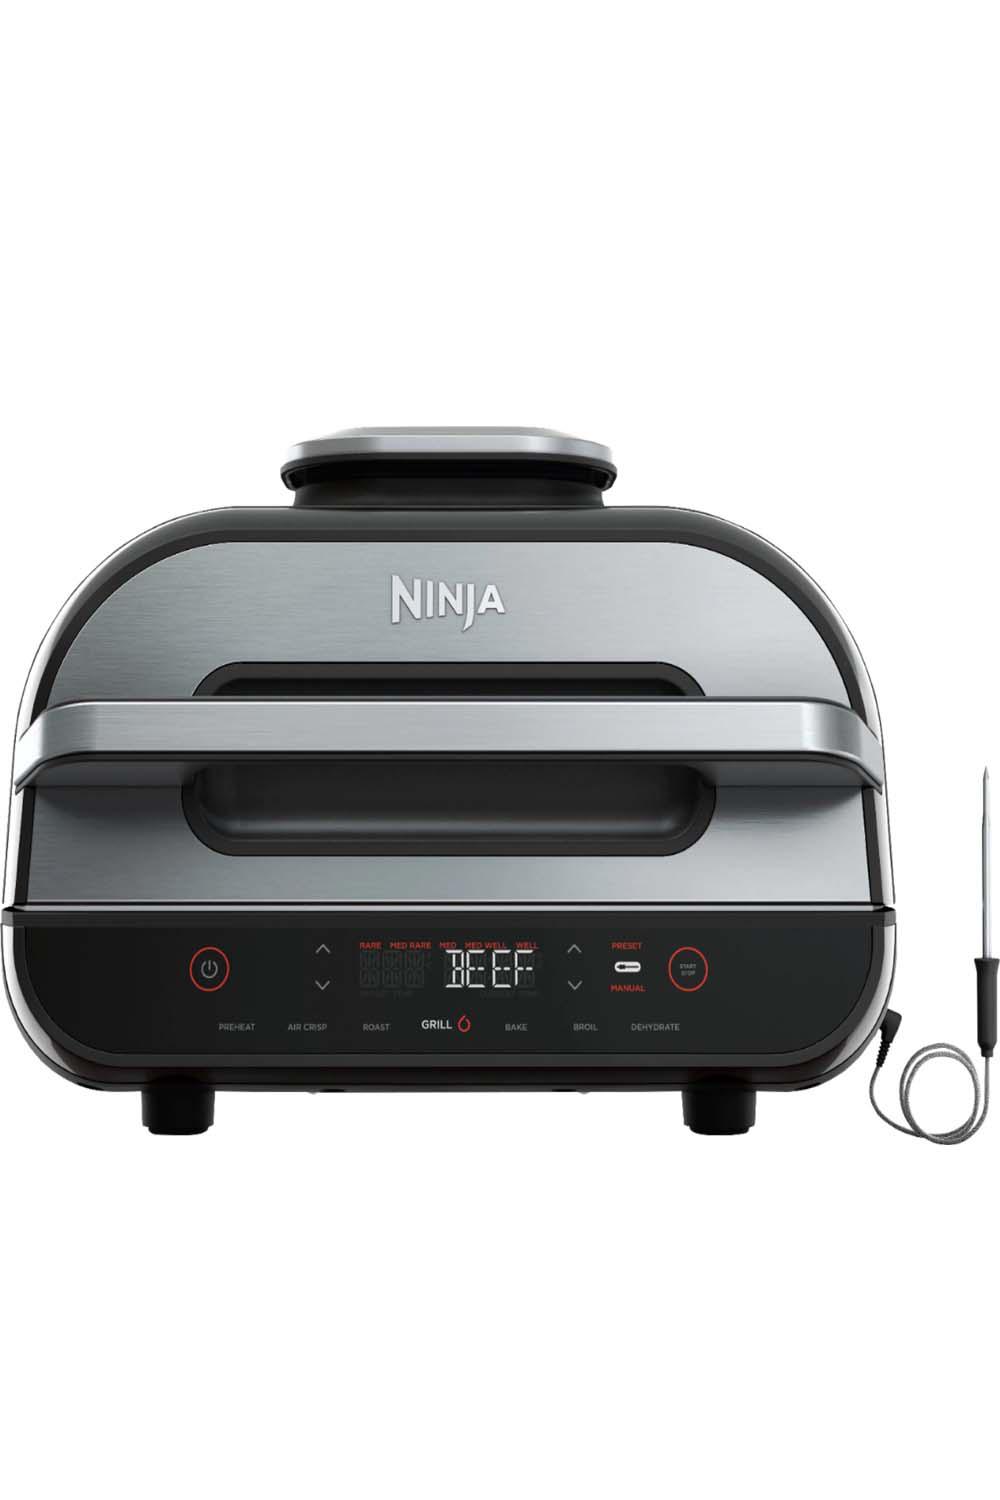 Ninja Foodi Smart XL 6-in-1 Indoor Grill with Air Fry, Roast, Bake, Broil &  Dehydrate, Smart Thermometer, Blue/Black - E